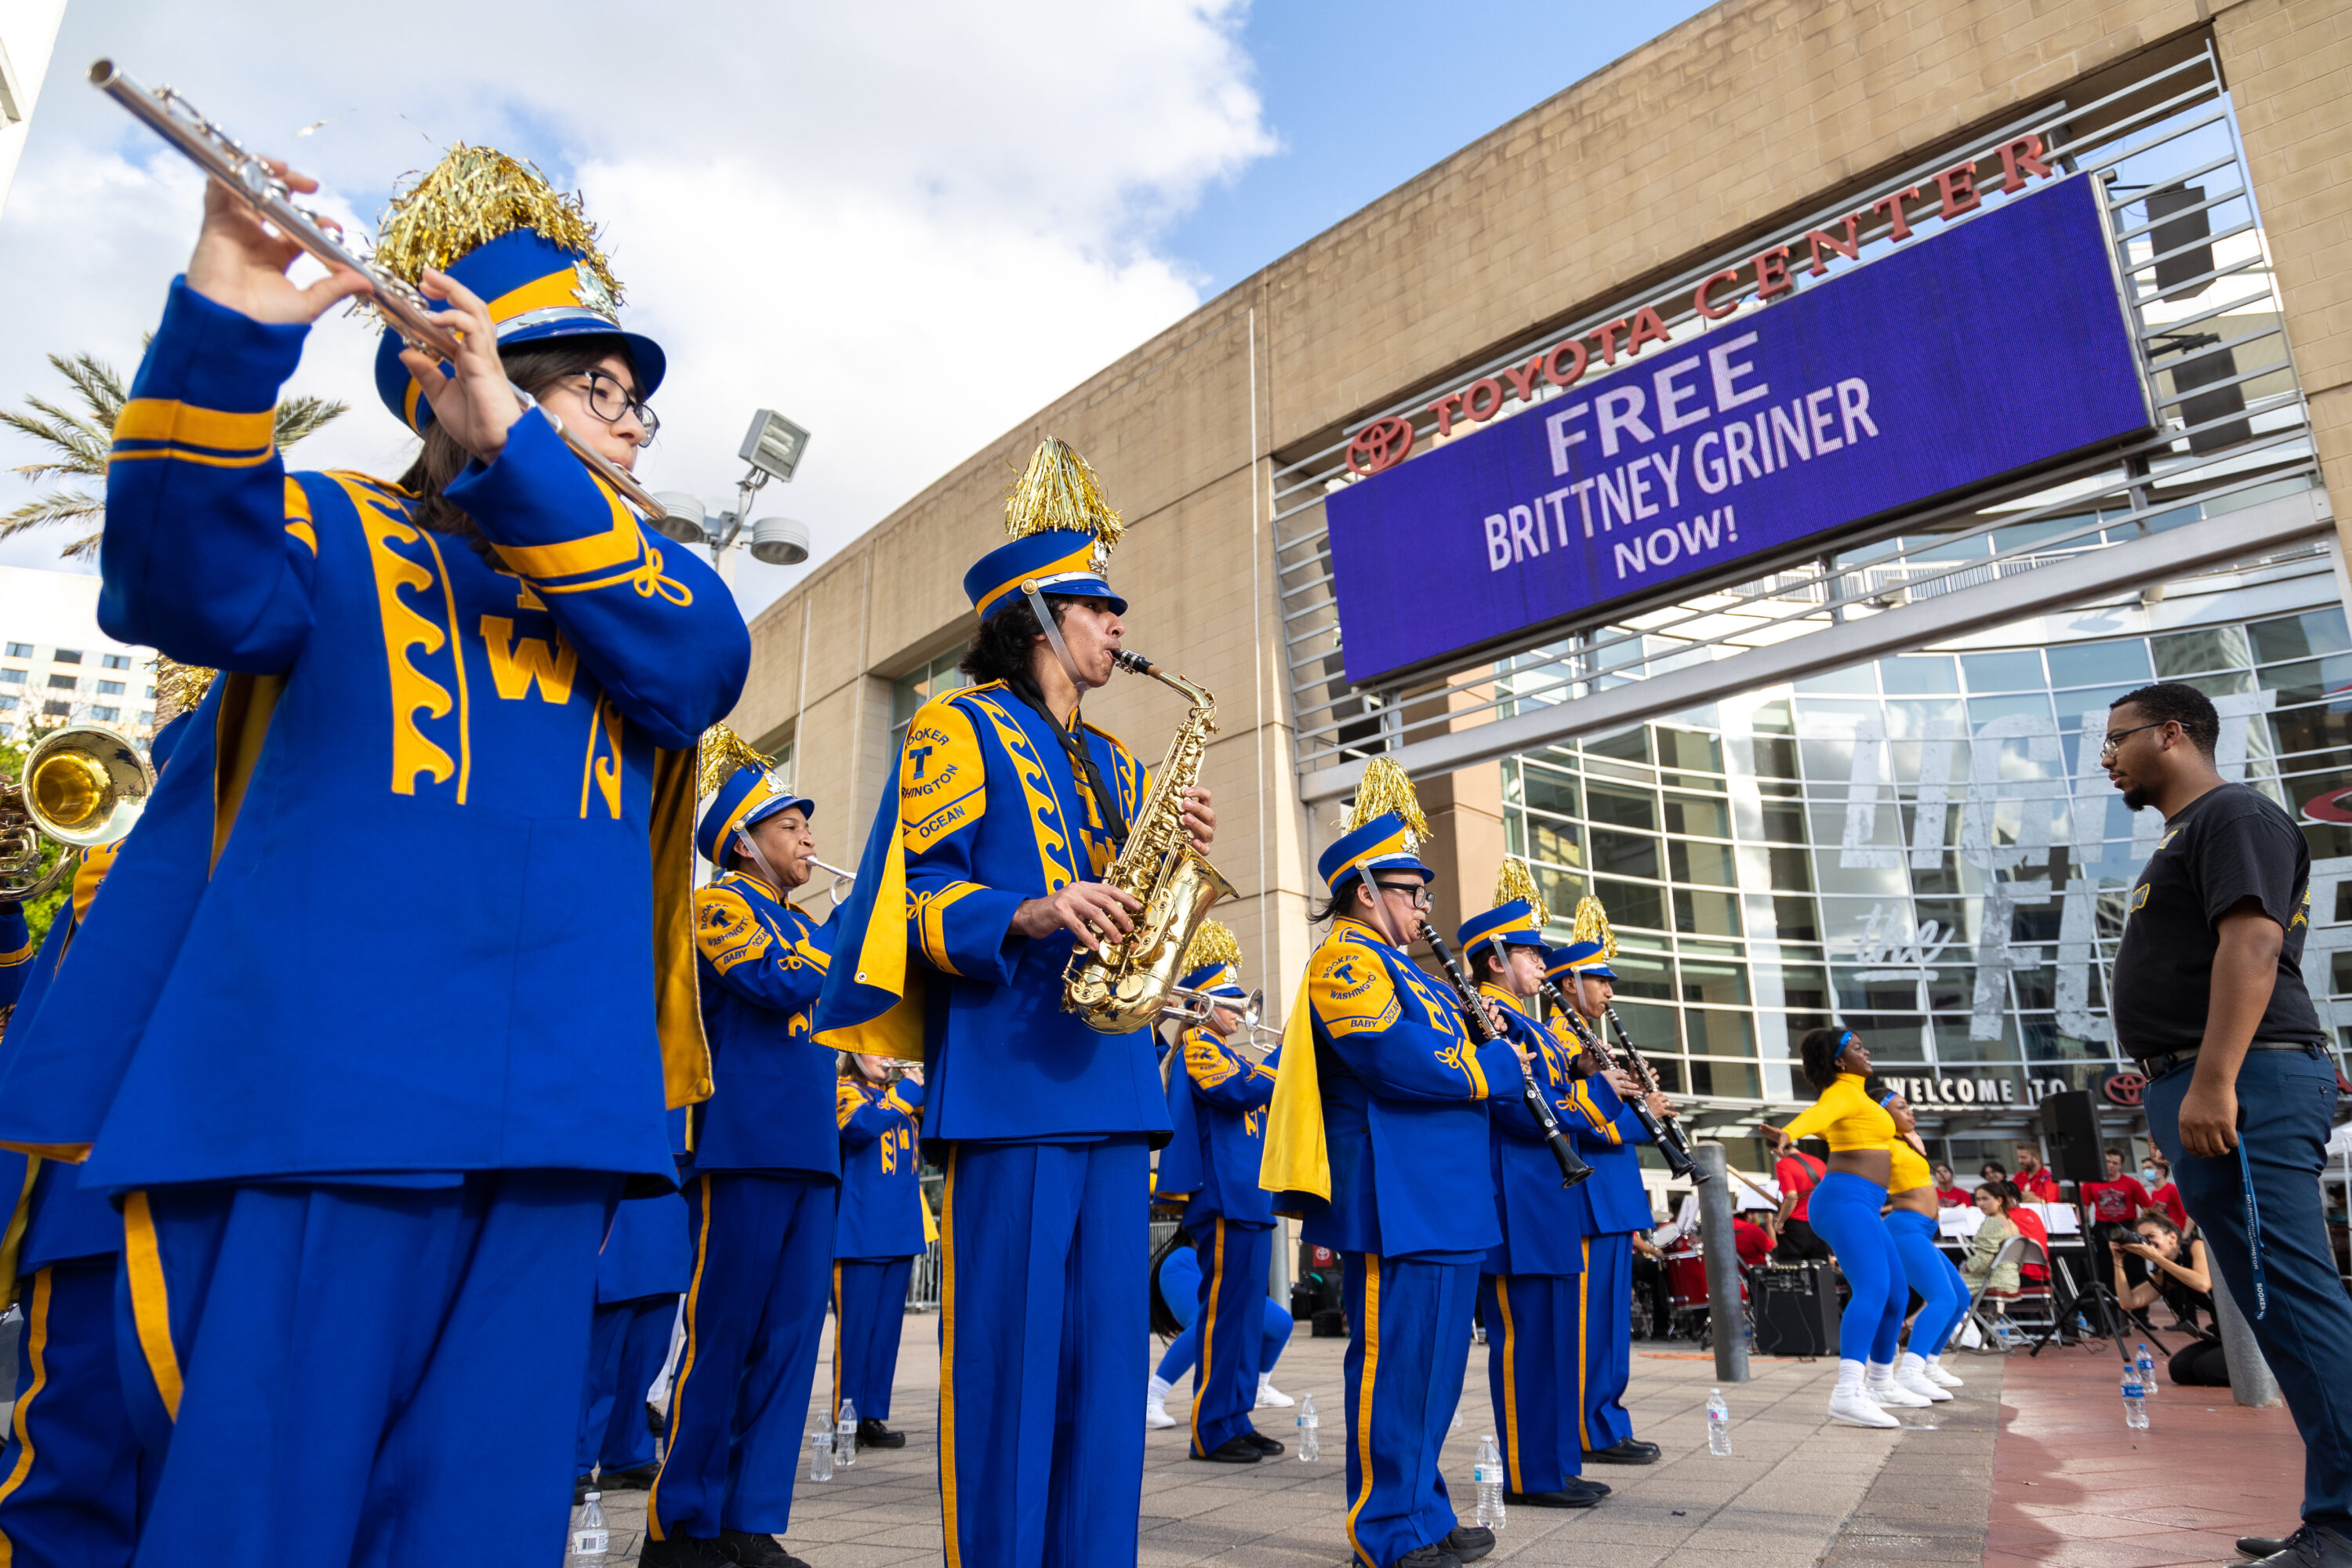 The Booker T. Washington High School band plays outside the Toyota Center during a rally on June 6, 2022 demanding WNBA player Brittney Griner be freed from Russian captivity. 